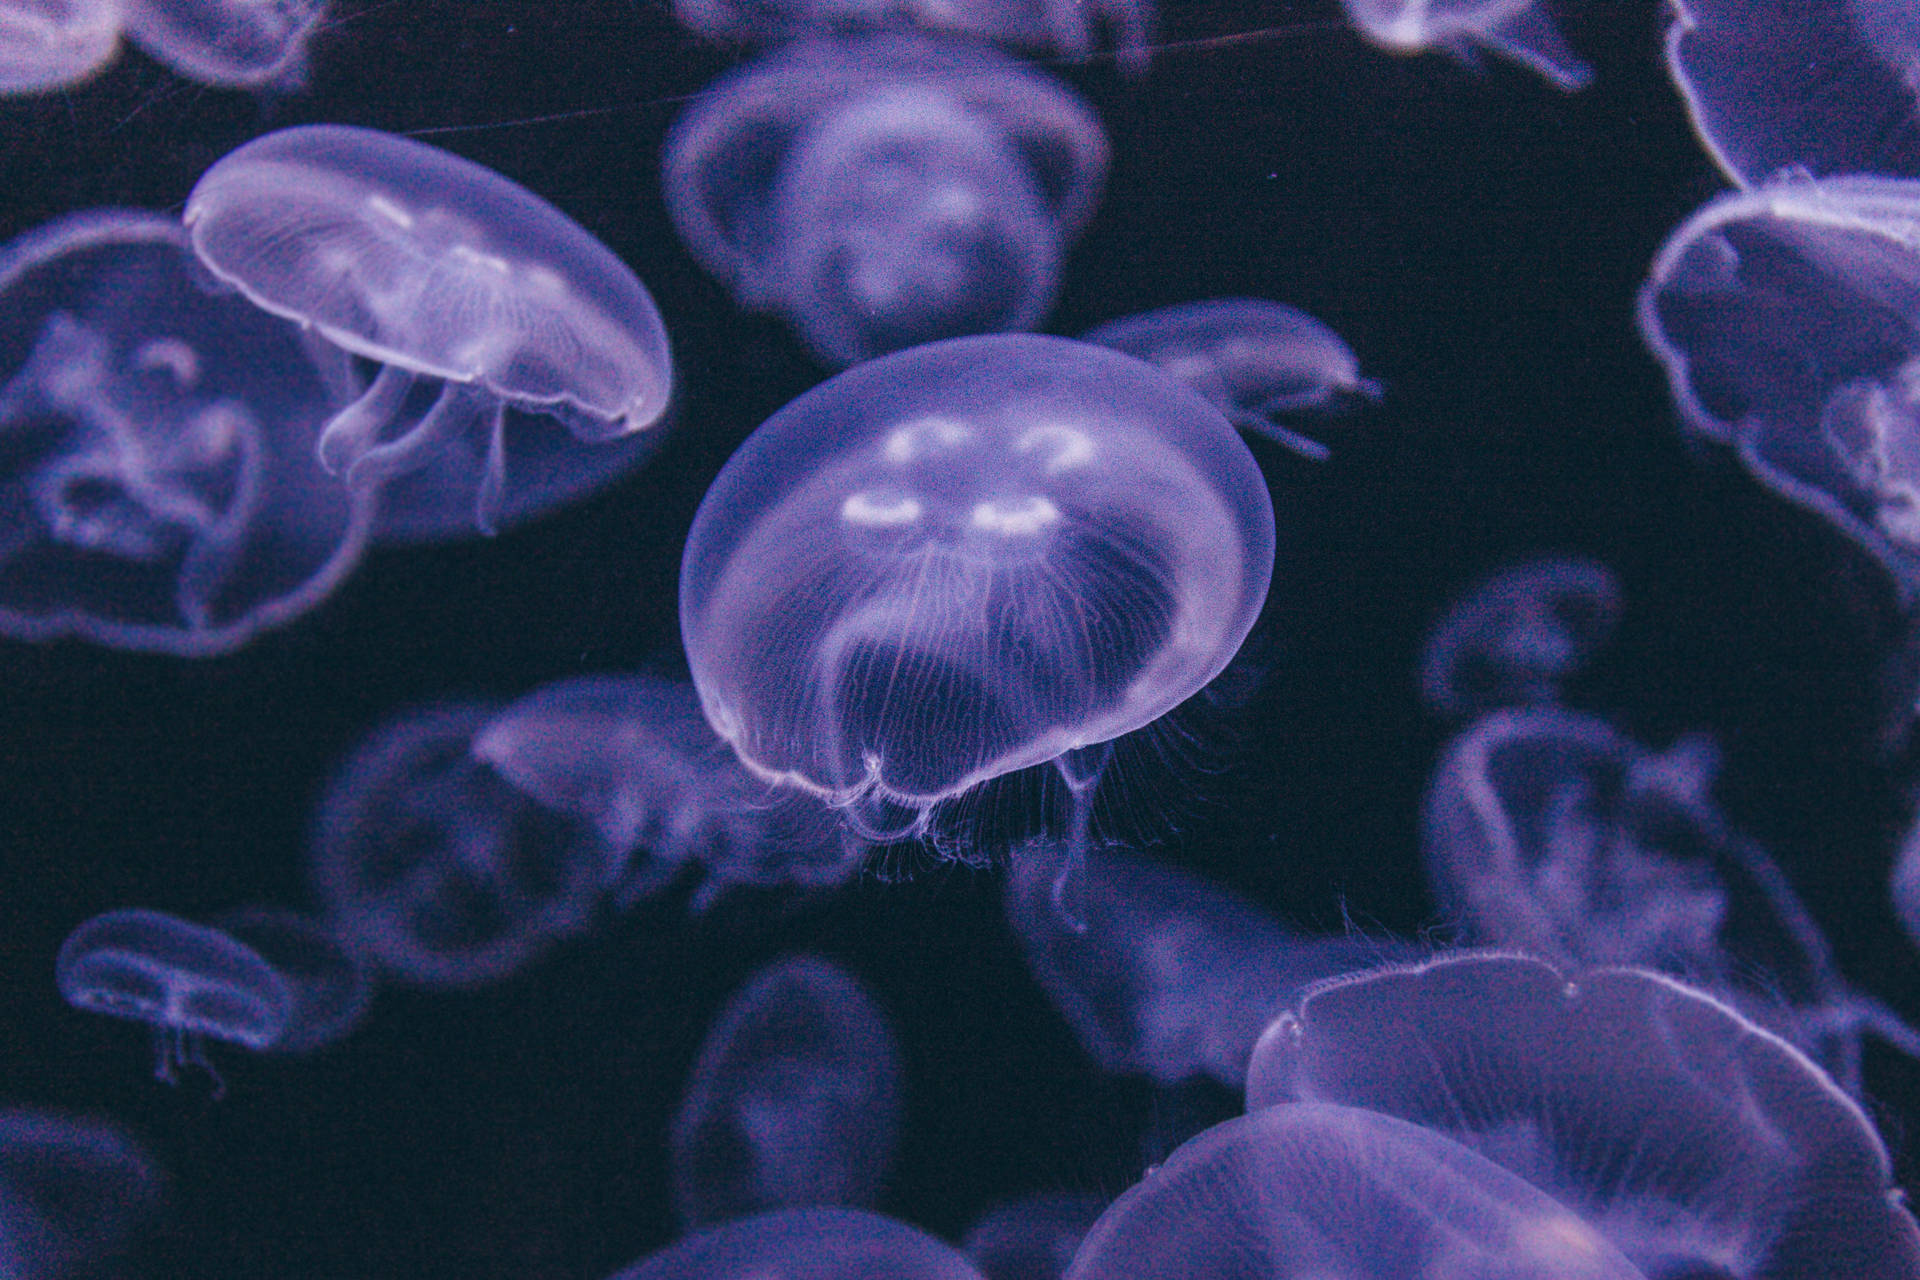 Jellyfish 5616X3744 Wallpaper and Background Image